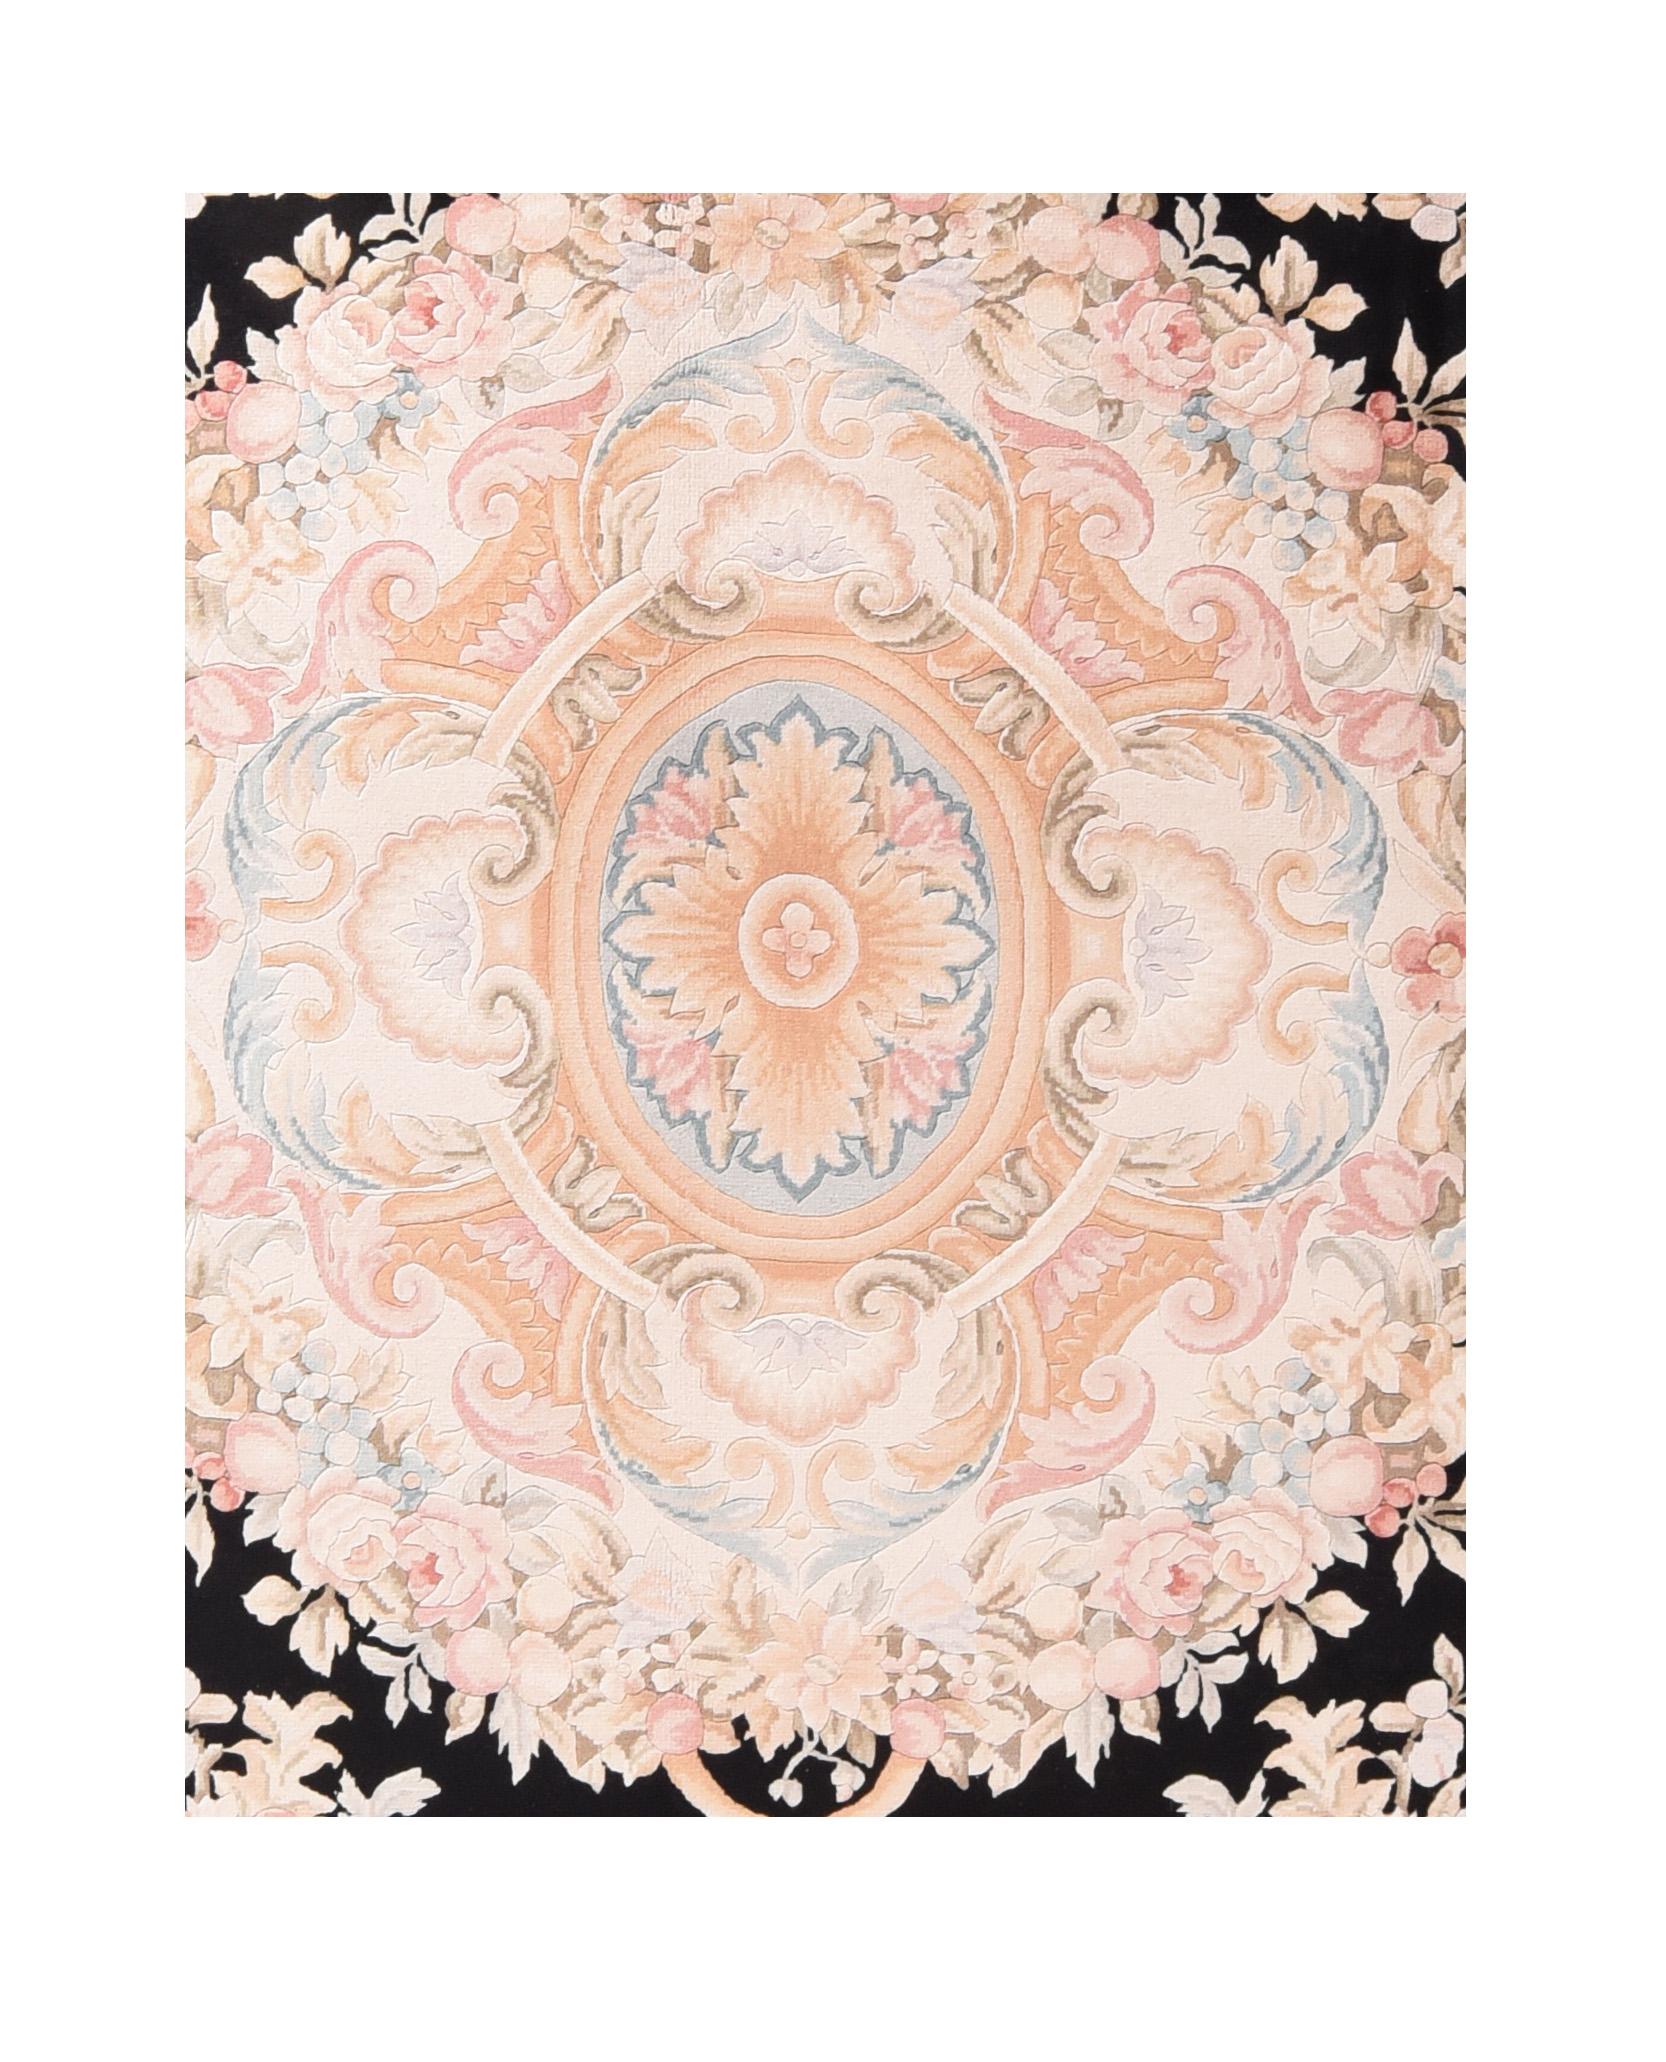 Fine French Savanory Weave Rug, Hand Knotted

Design: Center Medalion

The Savonnerie manufactory was the most prestigious European manufactory of knotted-pile carpets, enjoying its greatest period c. 1650–1685; the cachet of its name is